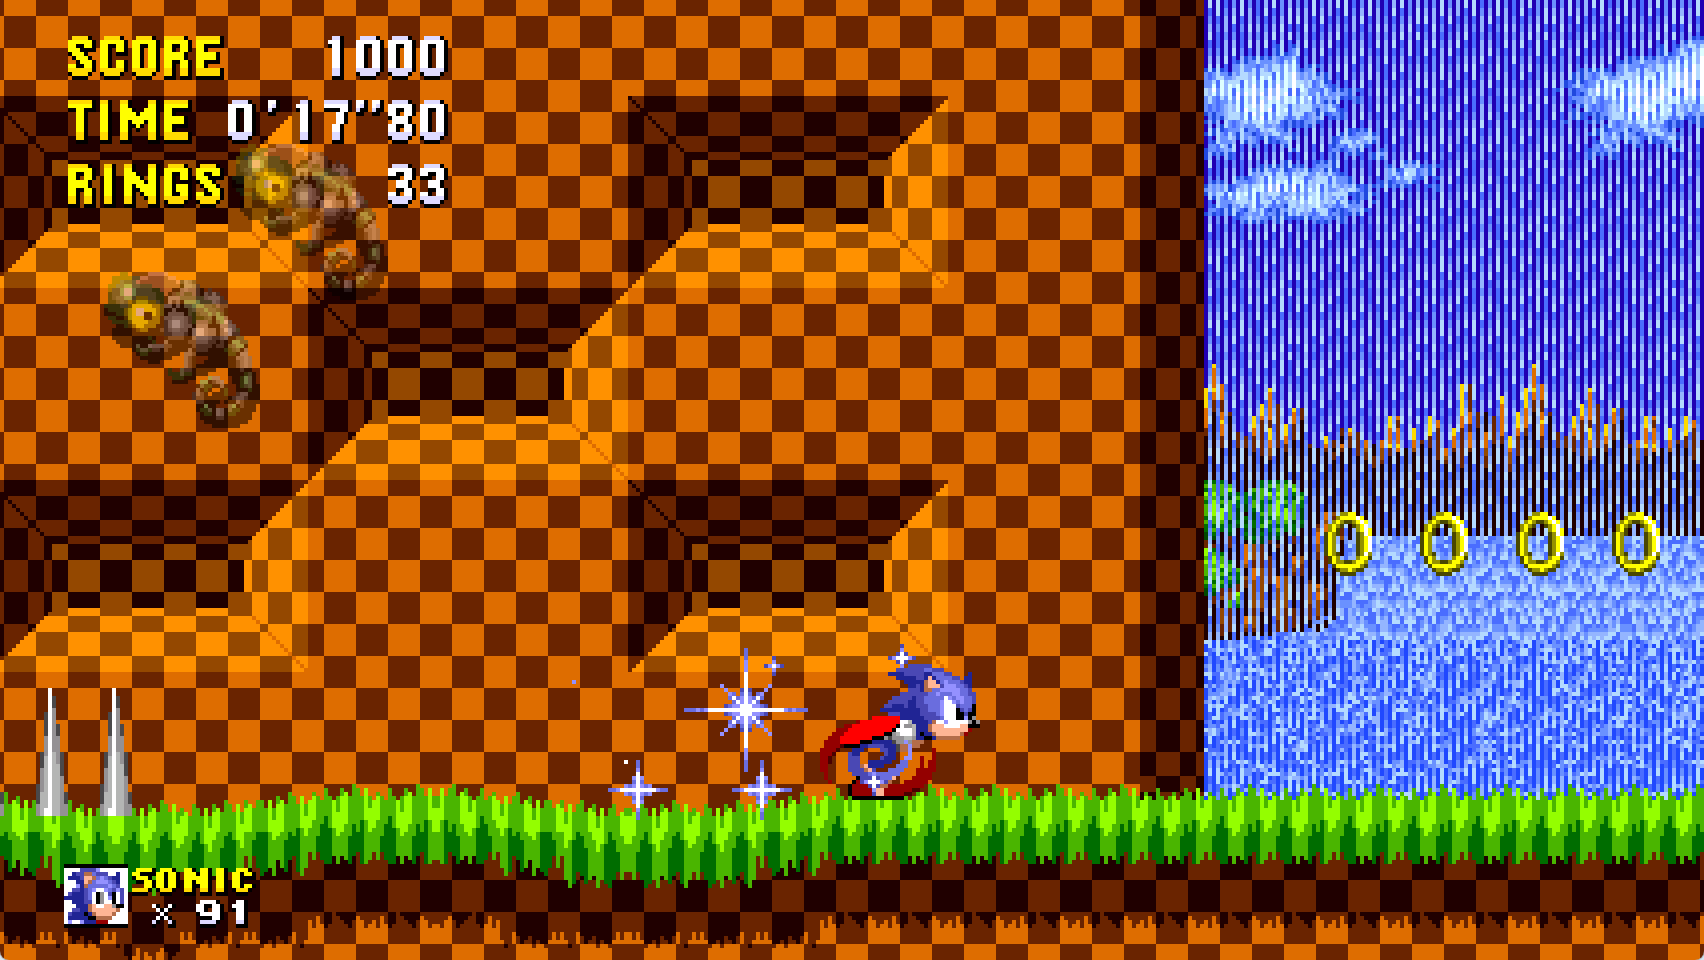 American Sonic 1 Forever [Sonic the Hedgehog Forever] [Mods]